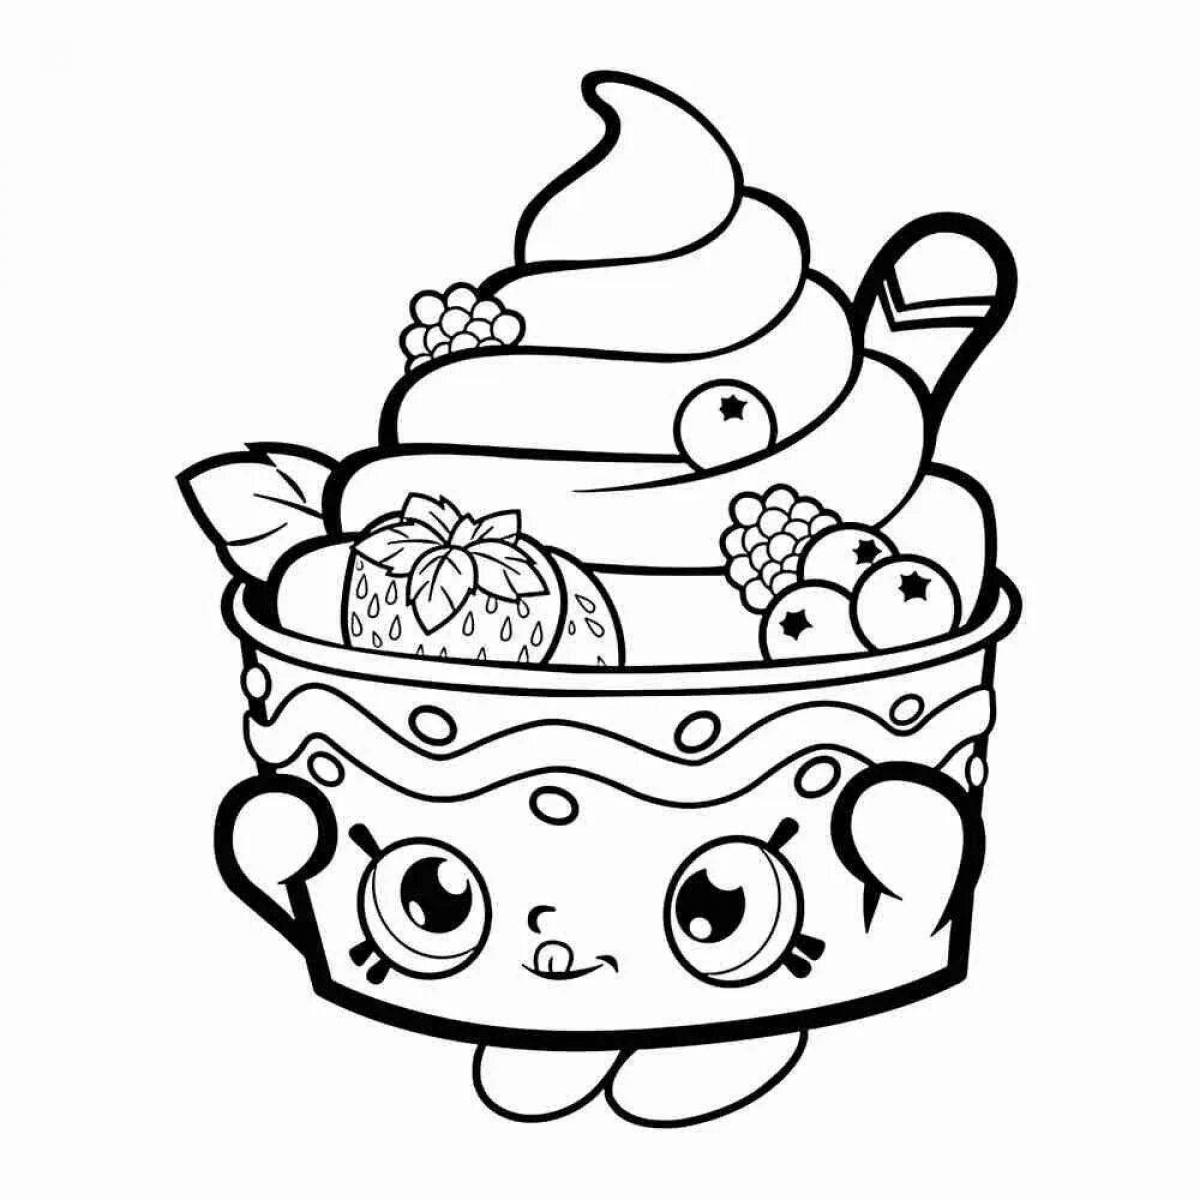 Fancy cake coloring pages